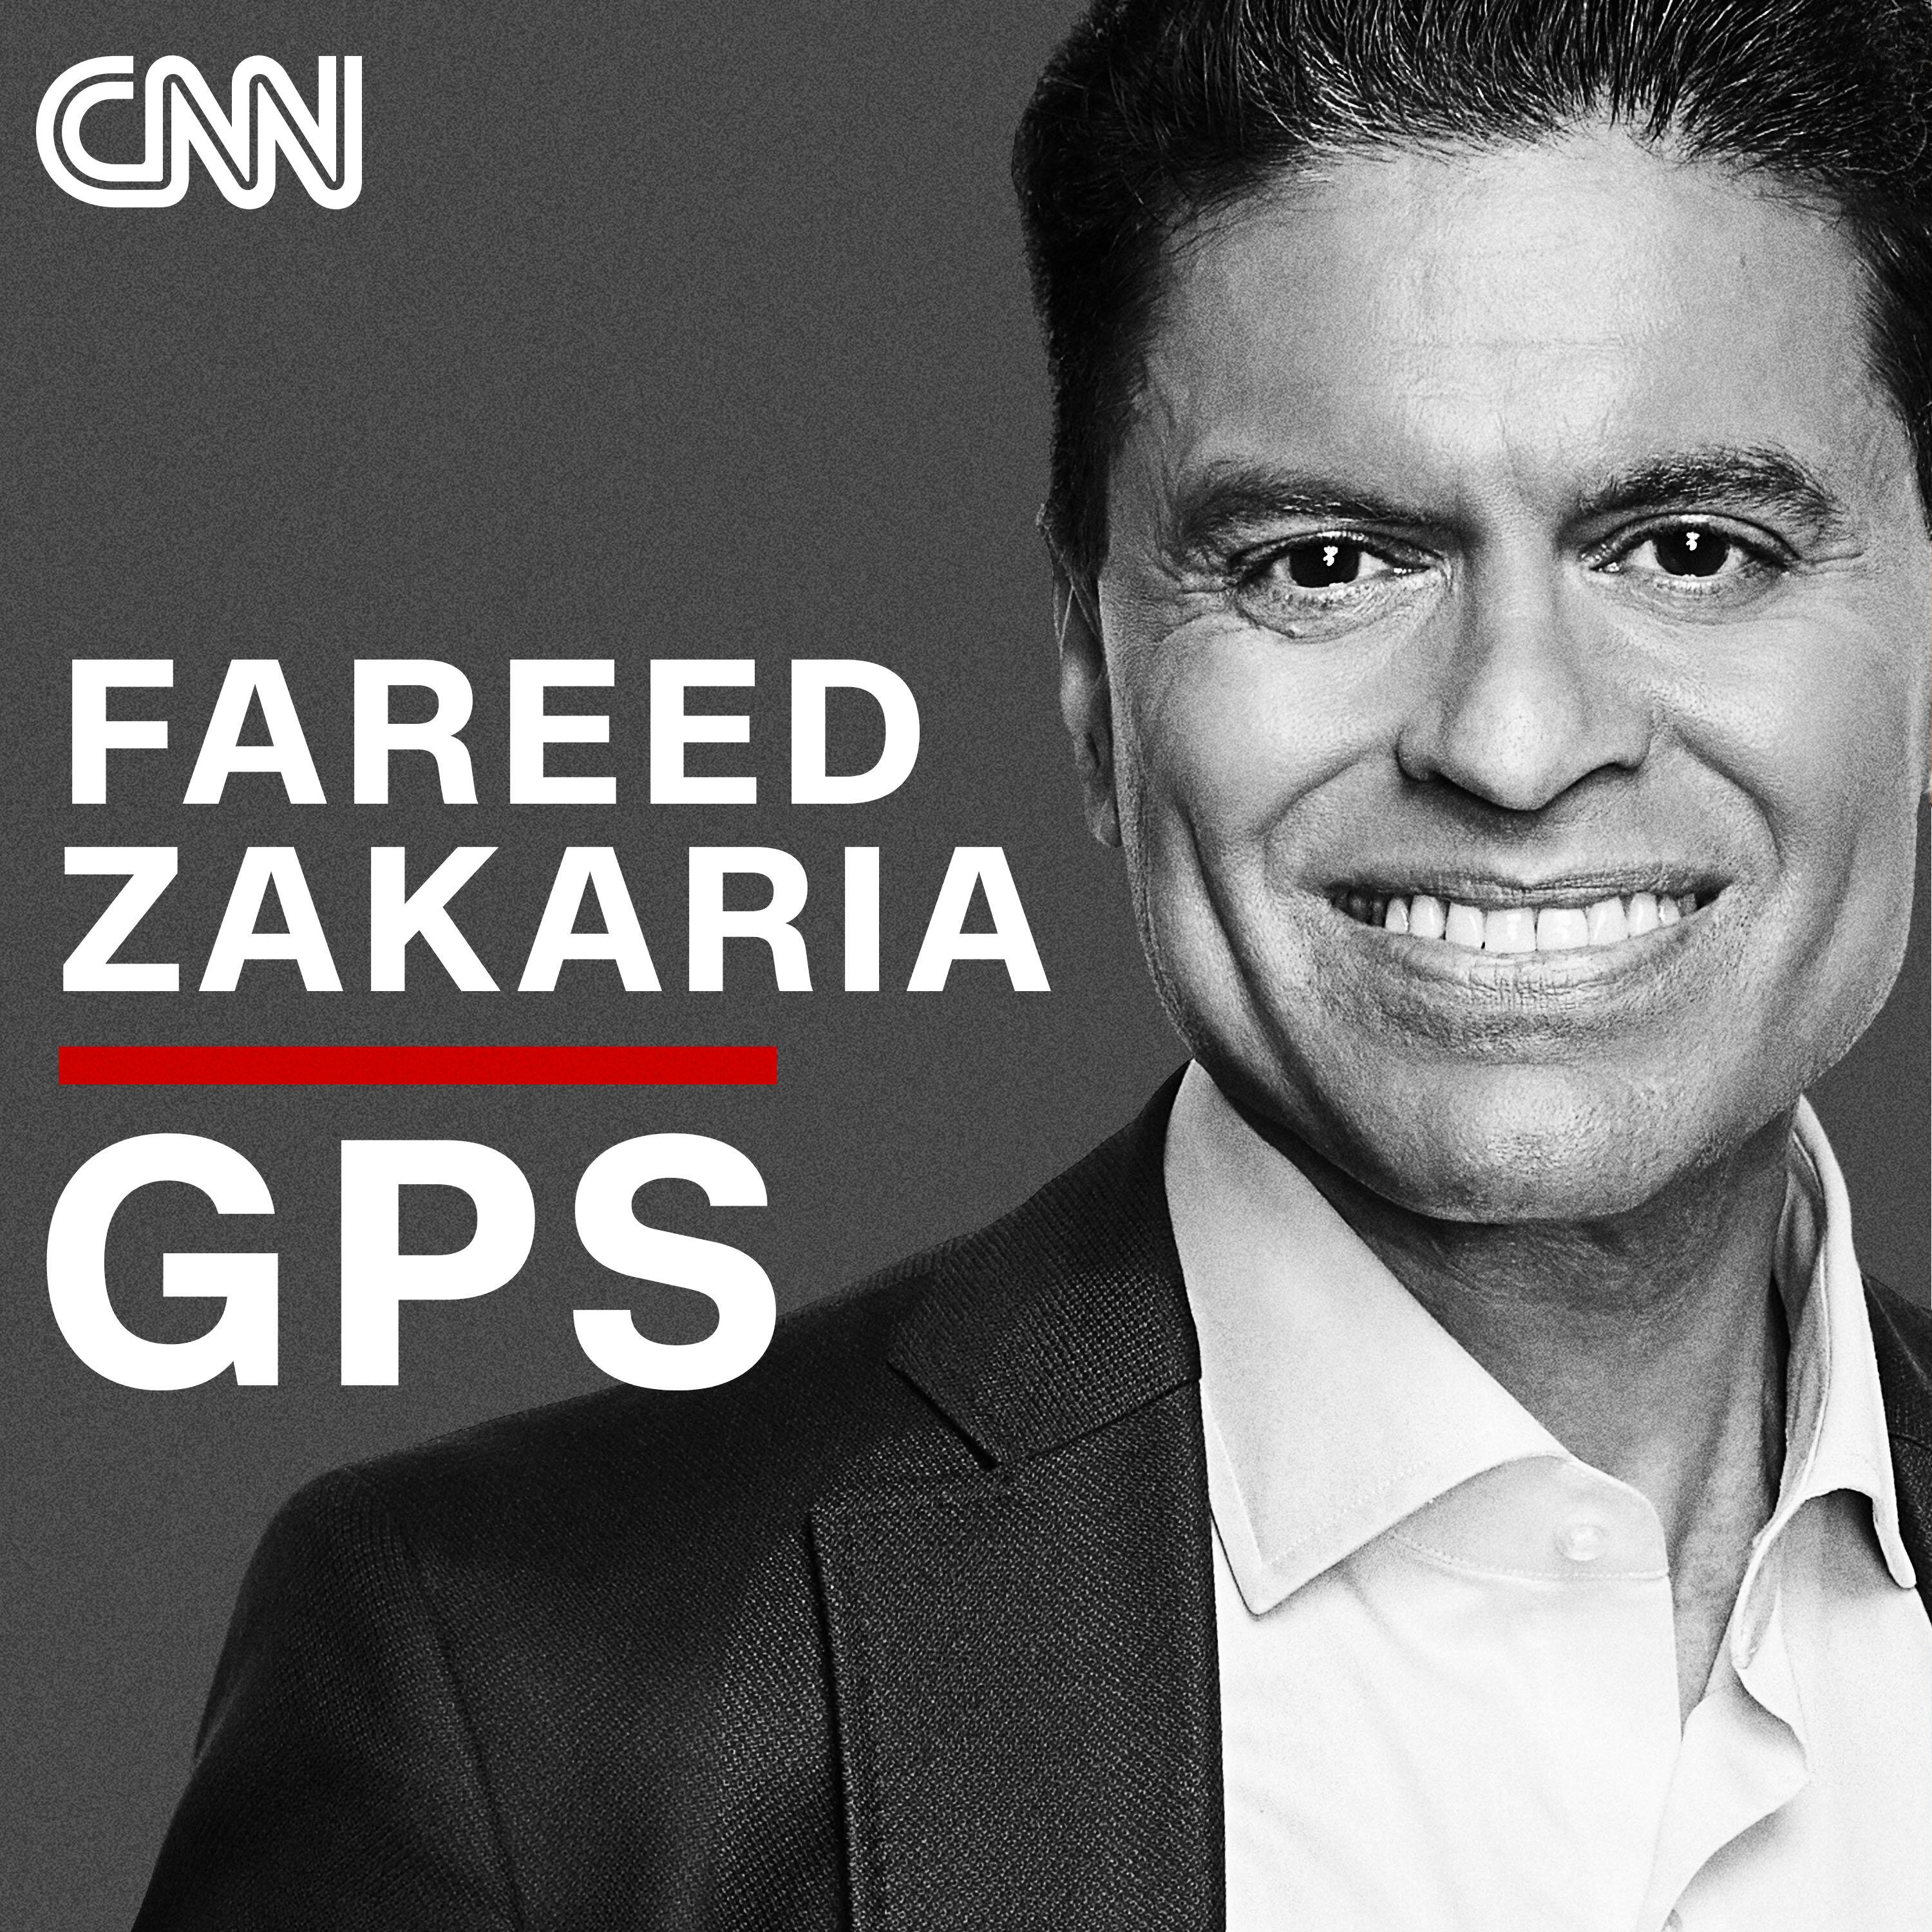 August, 18 2019: Is the world ready for a recession? Fareed has an all-star panel to discuss.